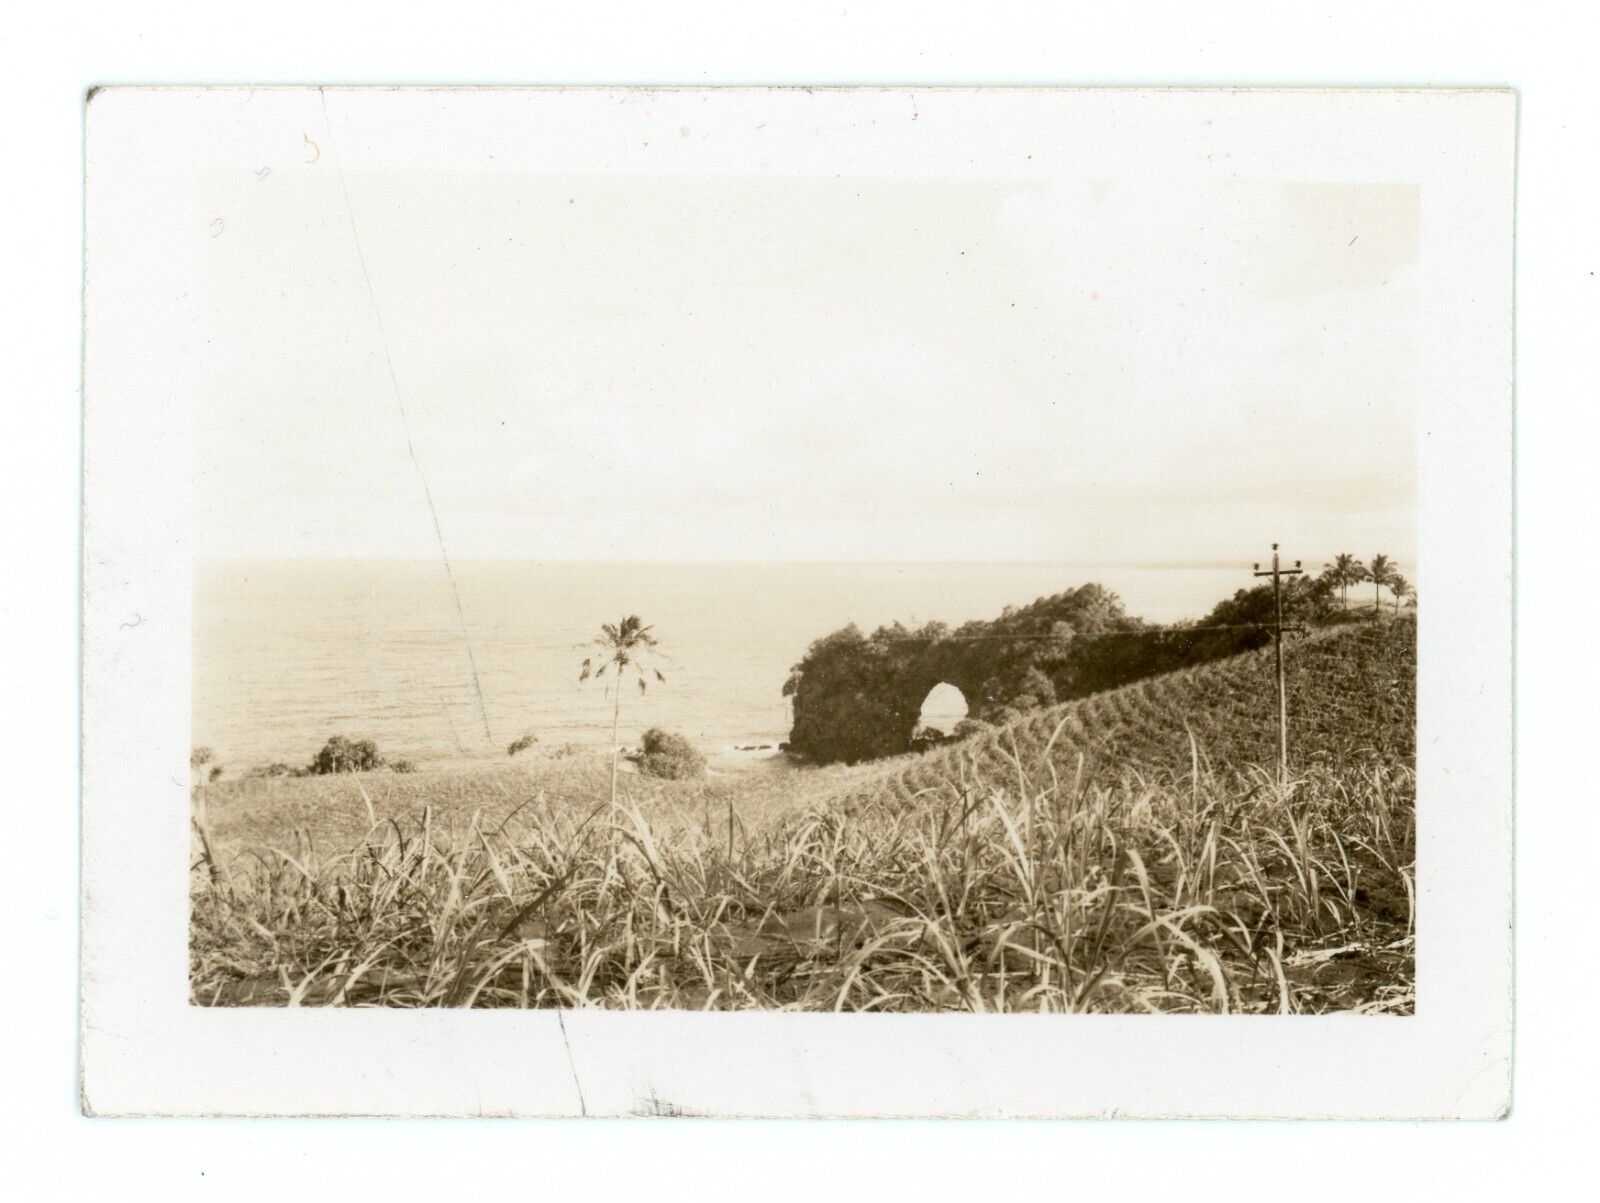 Onomea Gulch Hilo Hawaii Vintage Old Small Photos Photographs c1940s